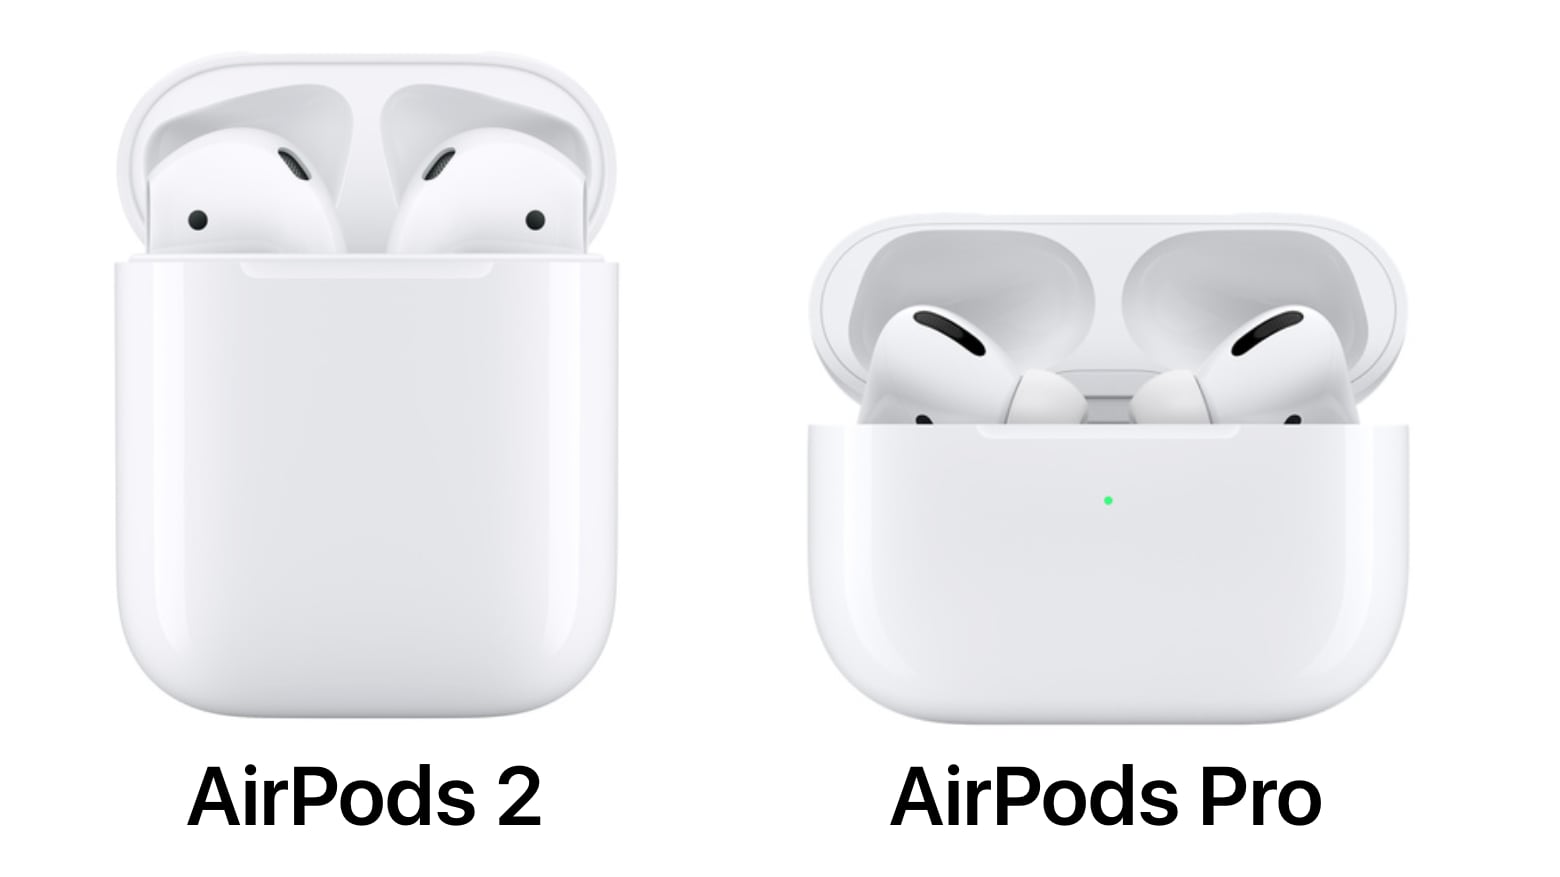 AirPods 2 vs AirPods Pro